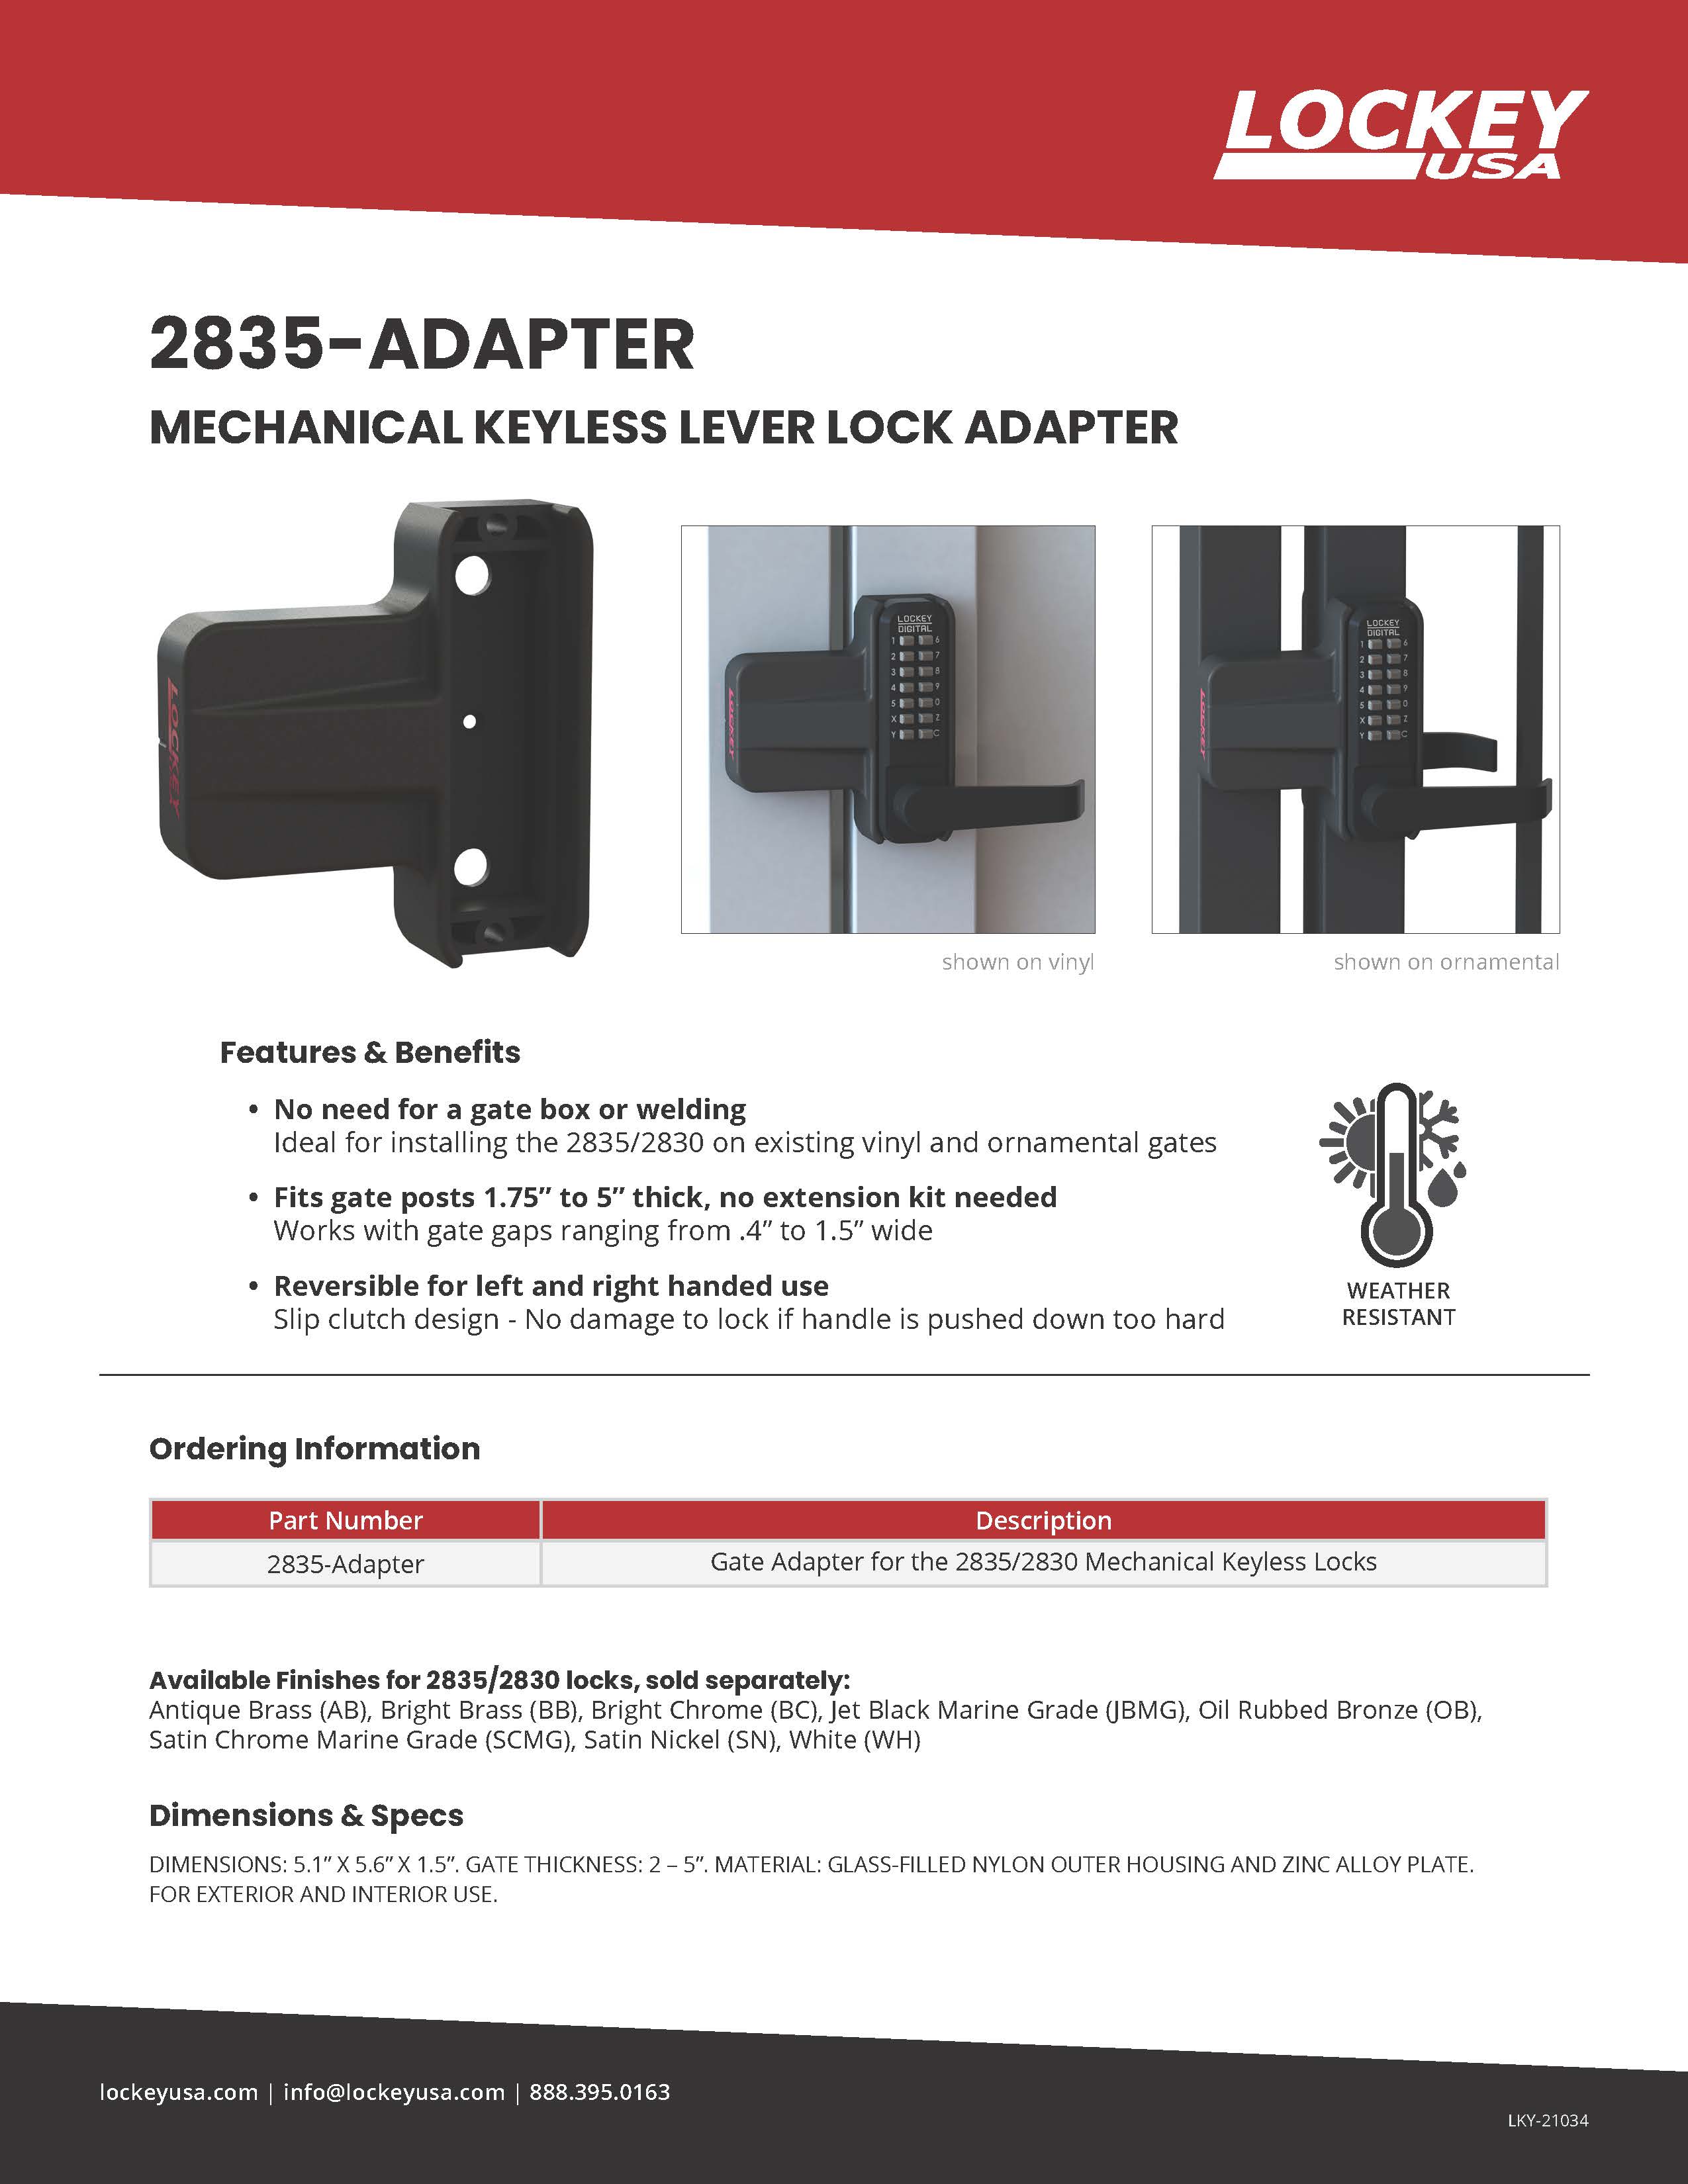 Lockey 2835-Adapter Adapter for installing the 2835/2830